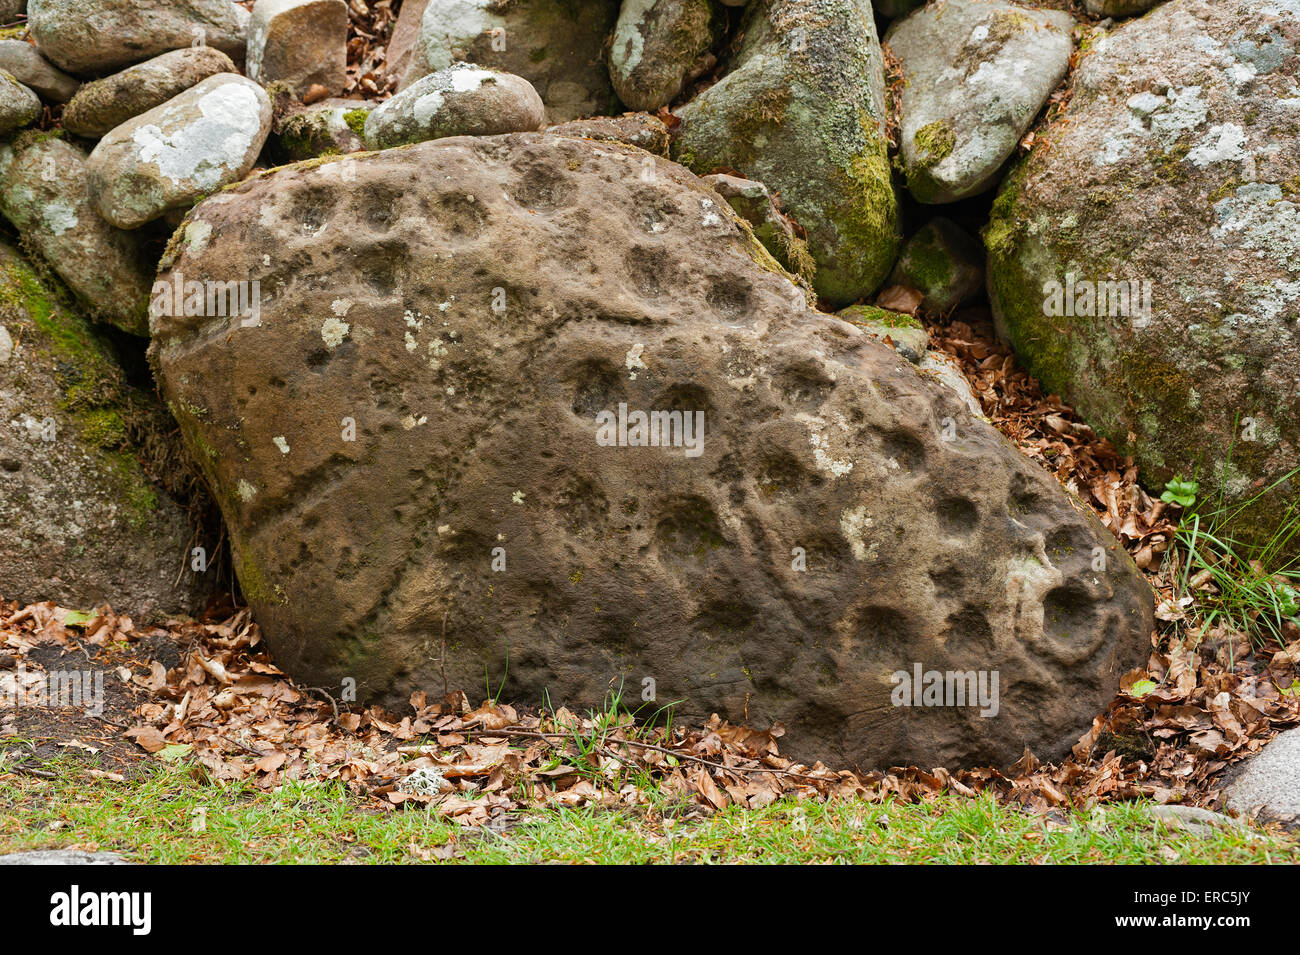 Ring and Cup marked stone at the Balnuaran Clava Cairns near Inverness. SCO 9822. Stock Photo